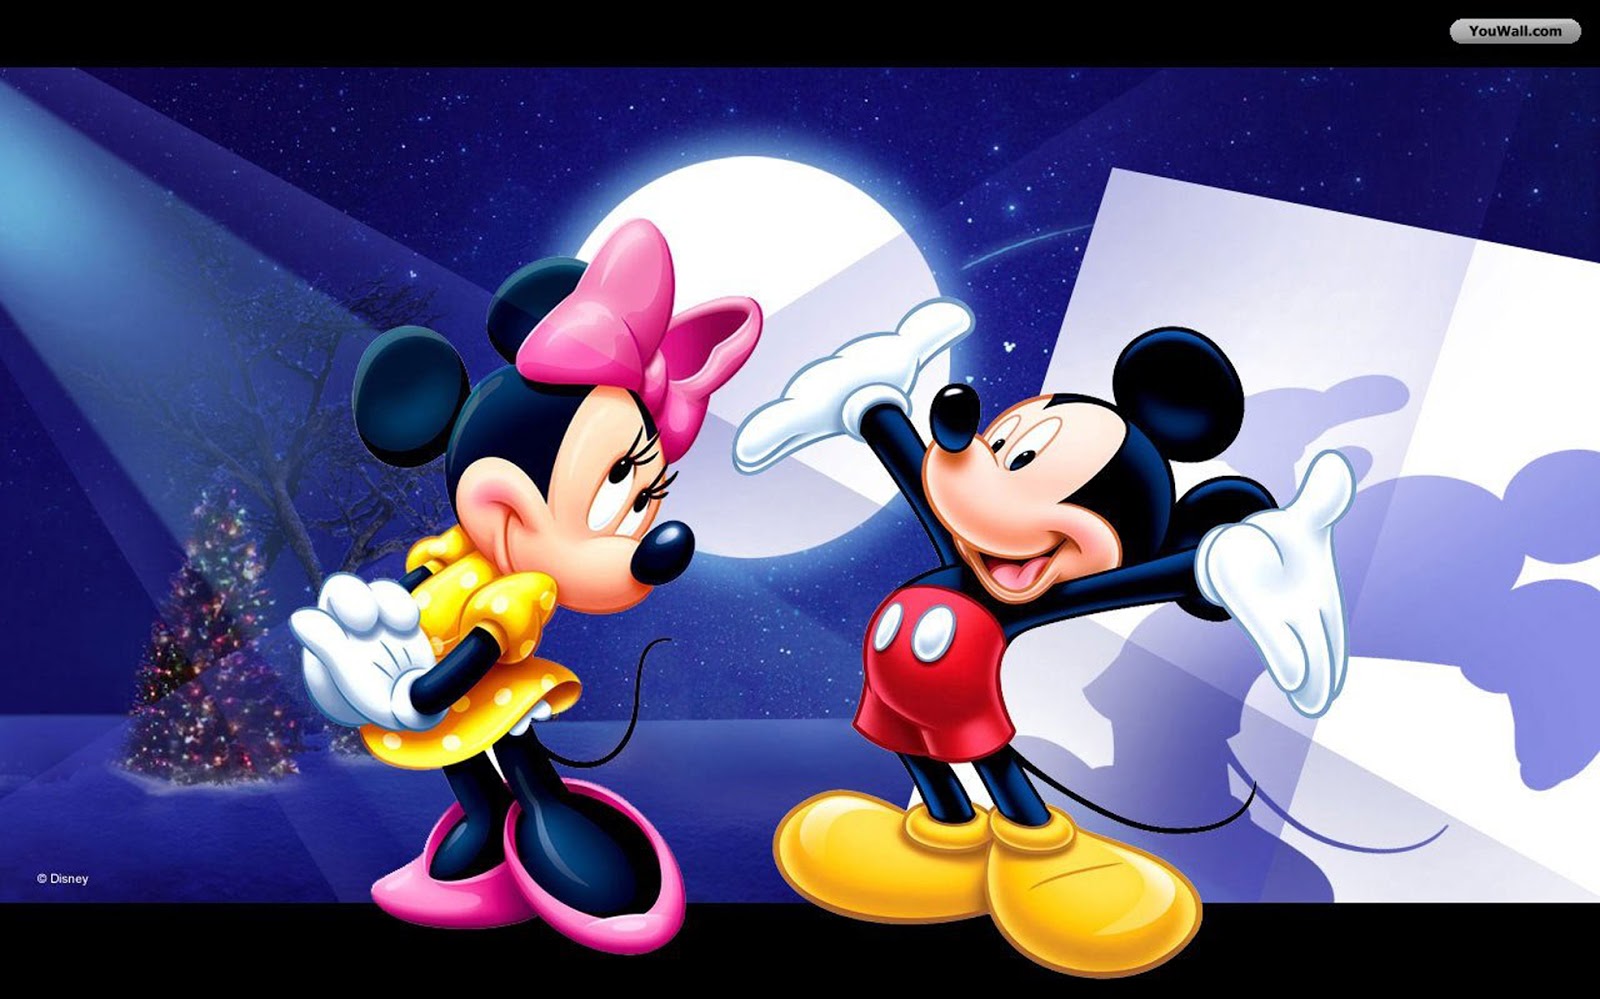 Wallpaper ID 565551  mouse love hd couple wedding wallpaper 2K  minnie disney mickey puzzle free download